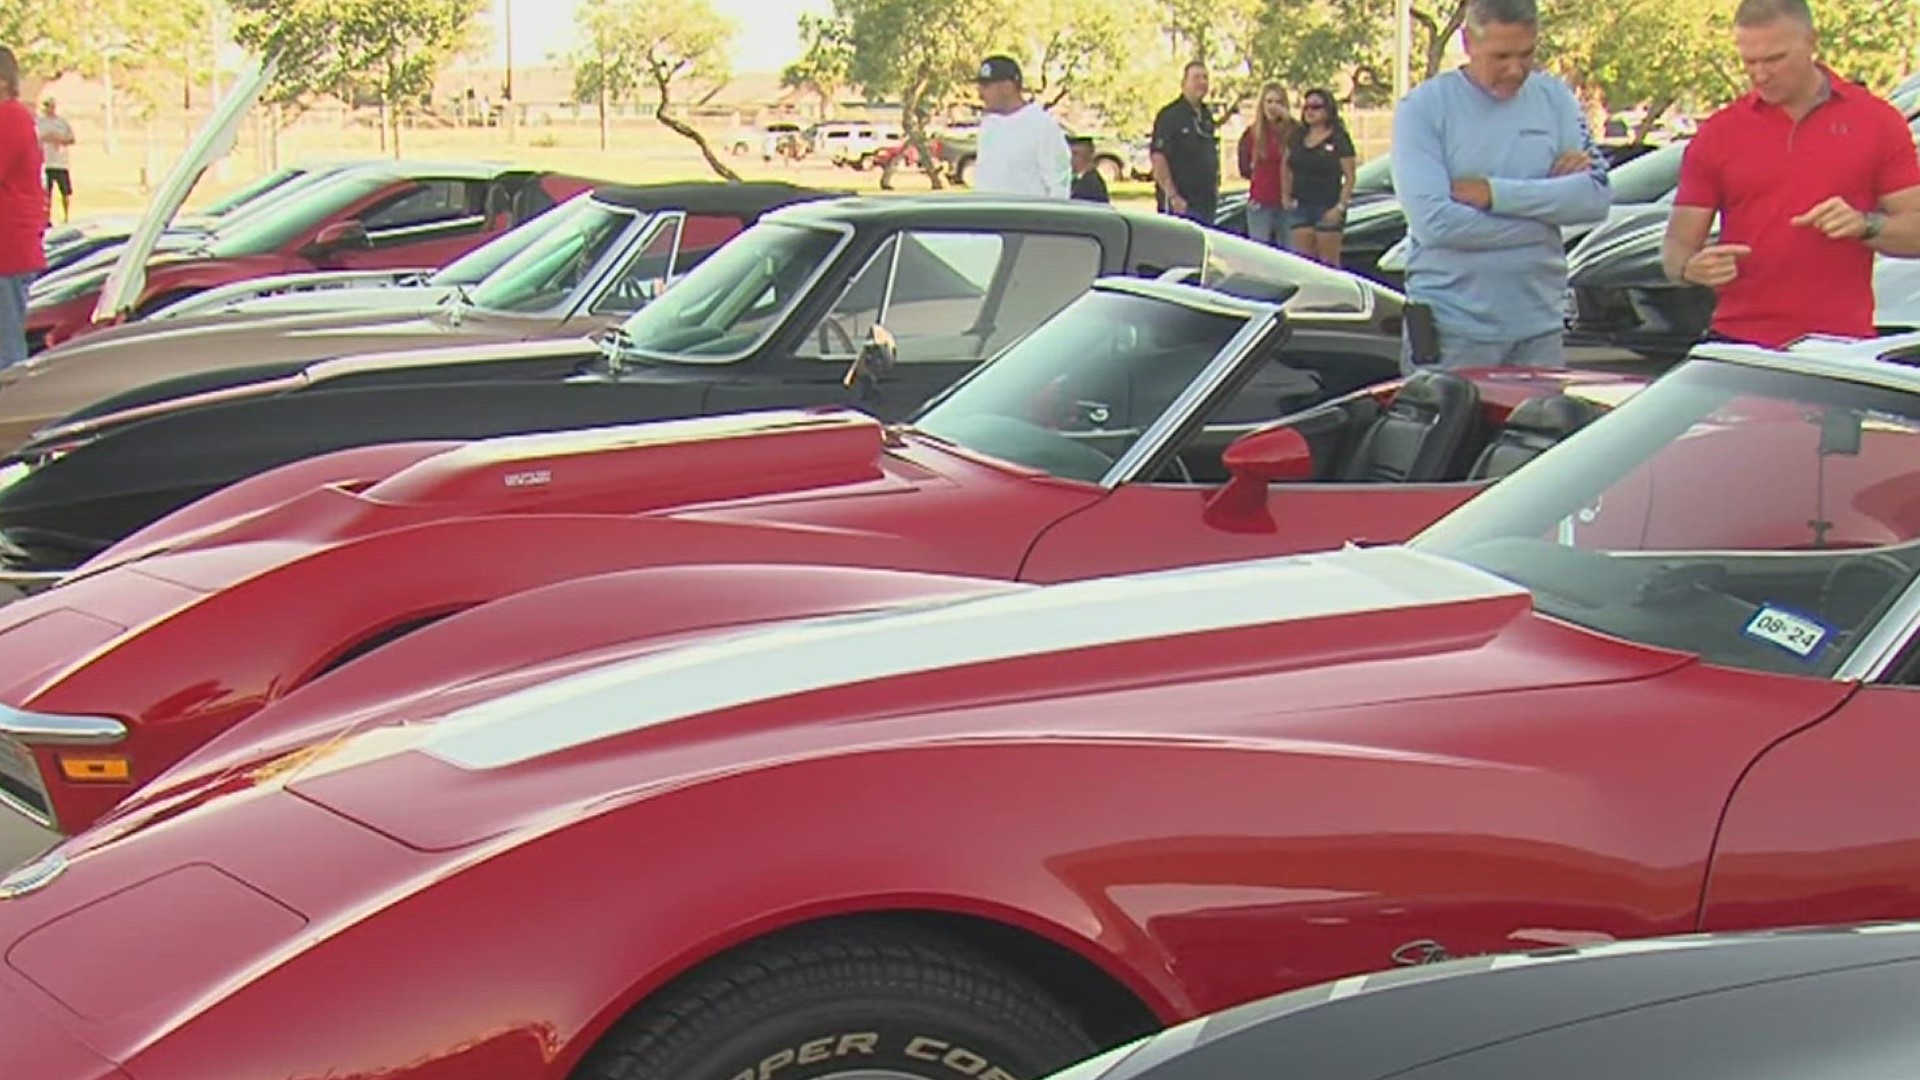 The club gets together for cruises and fundraisers to share their love of corvettes and our community.